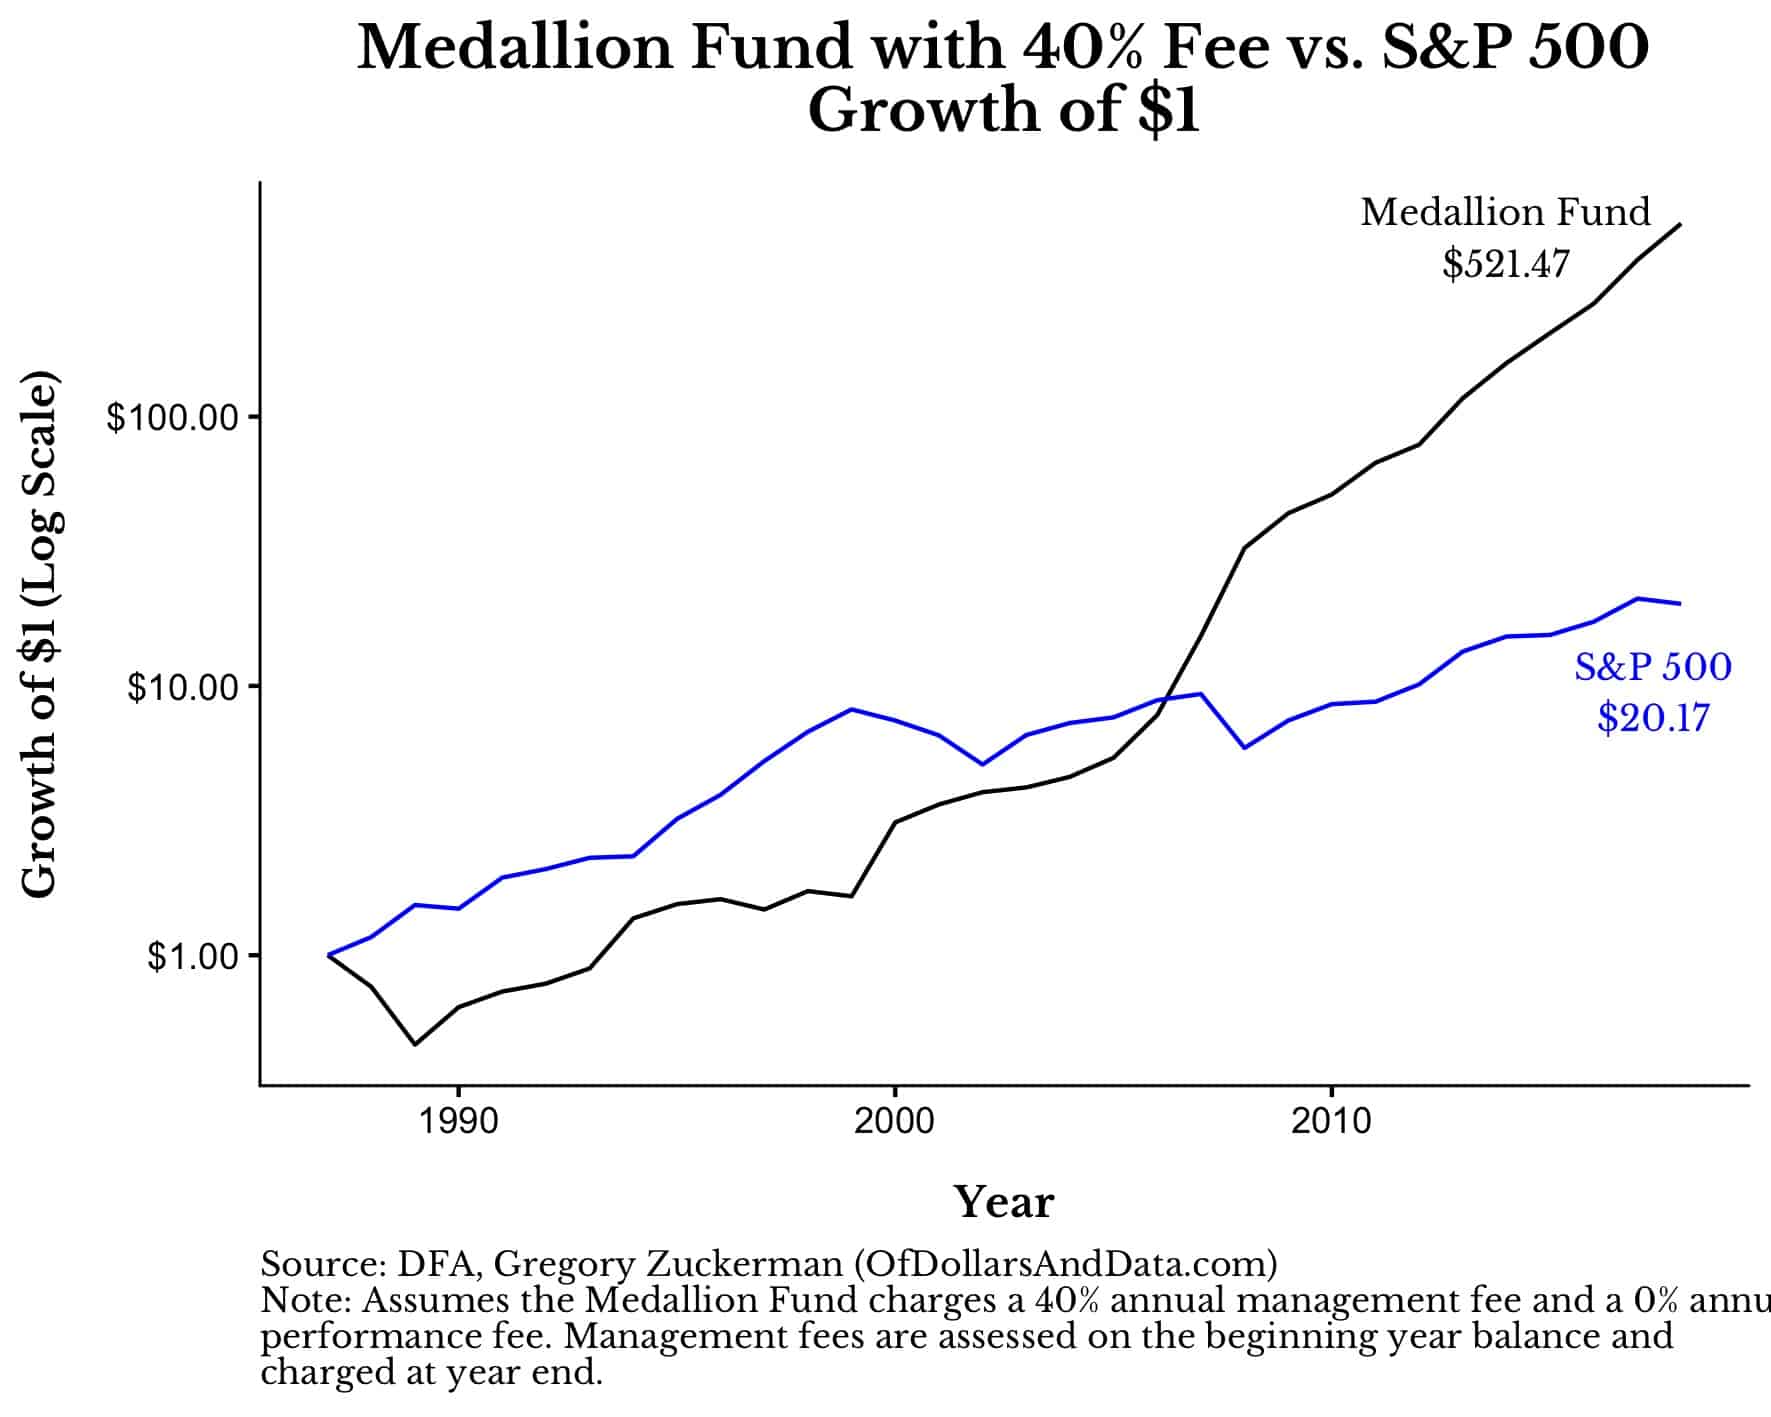 The growth of the Medallion Fund with a 40% fee versus the S&P 500 from the late 1980s until the mid 2010s.